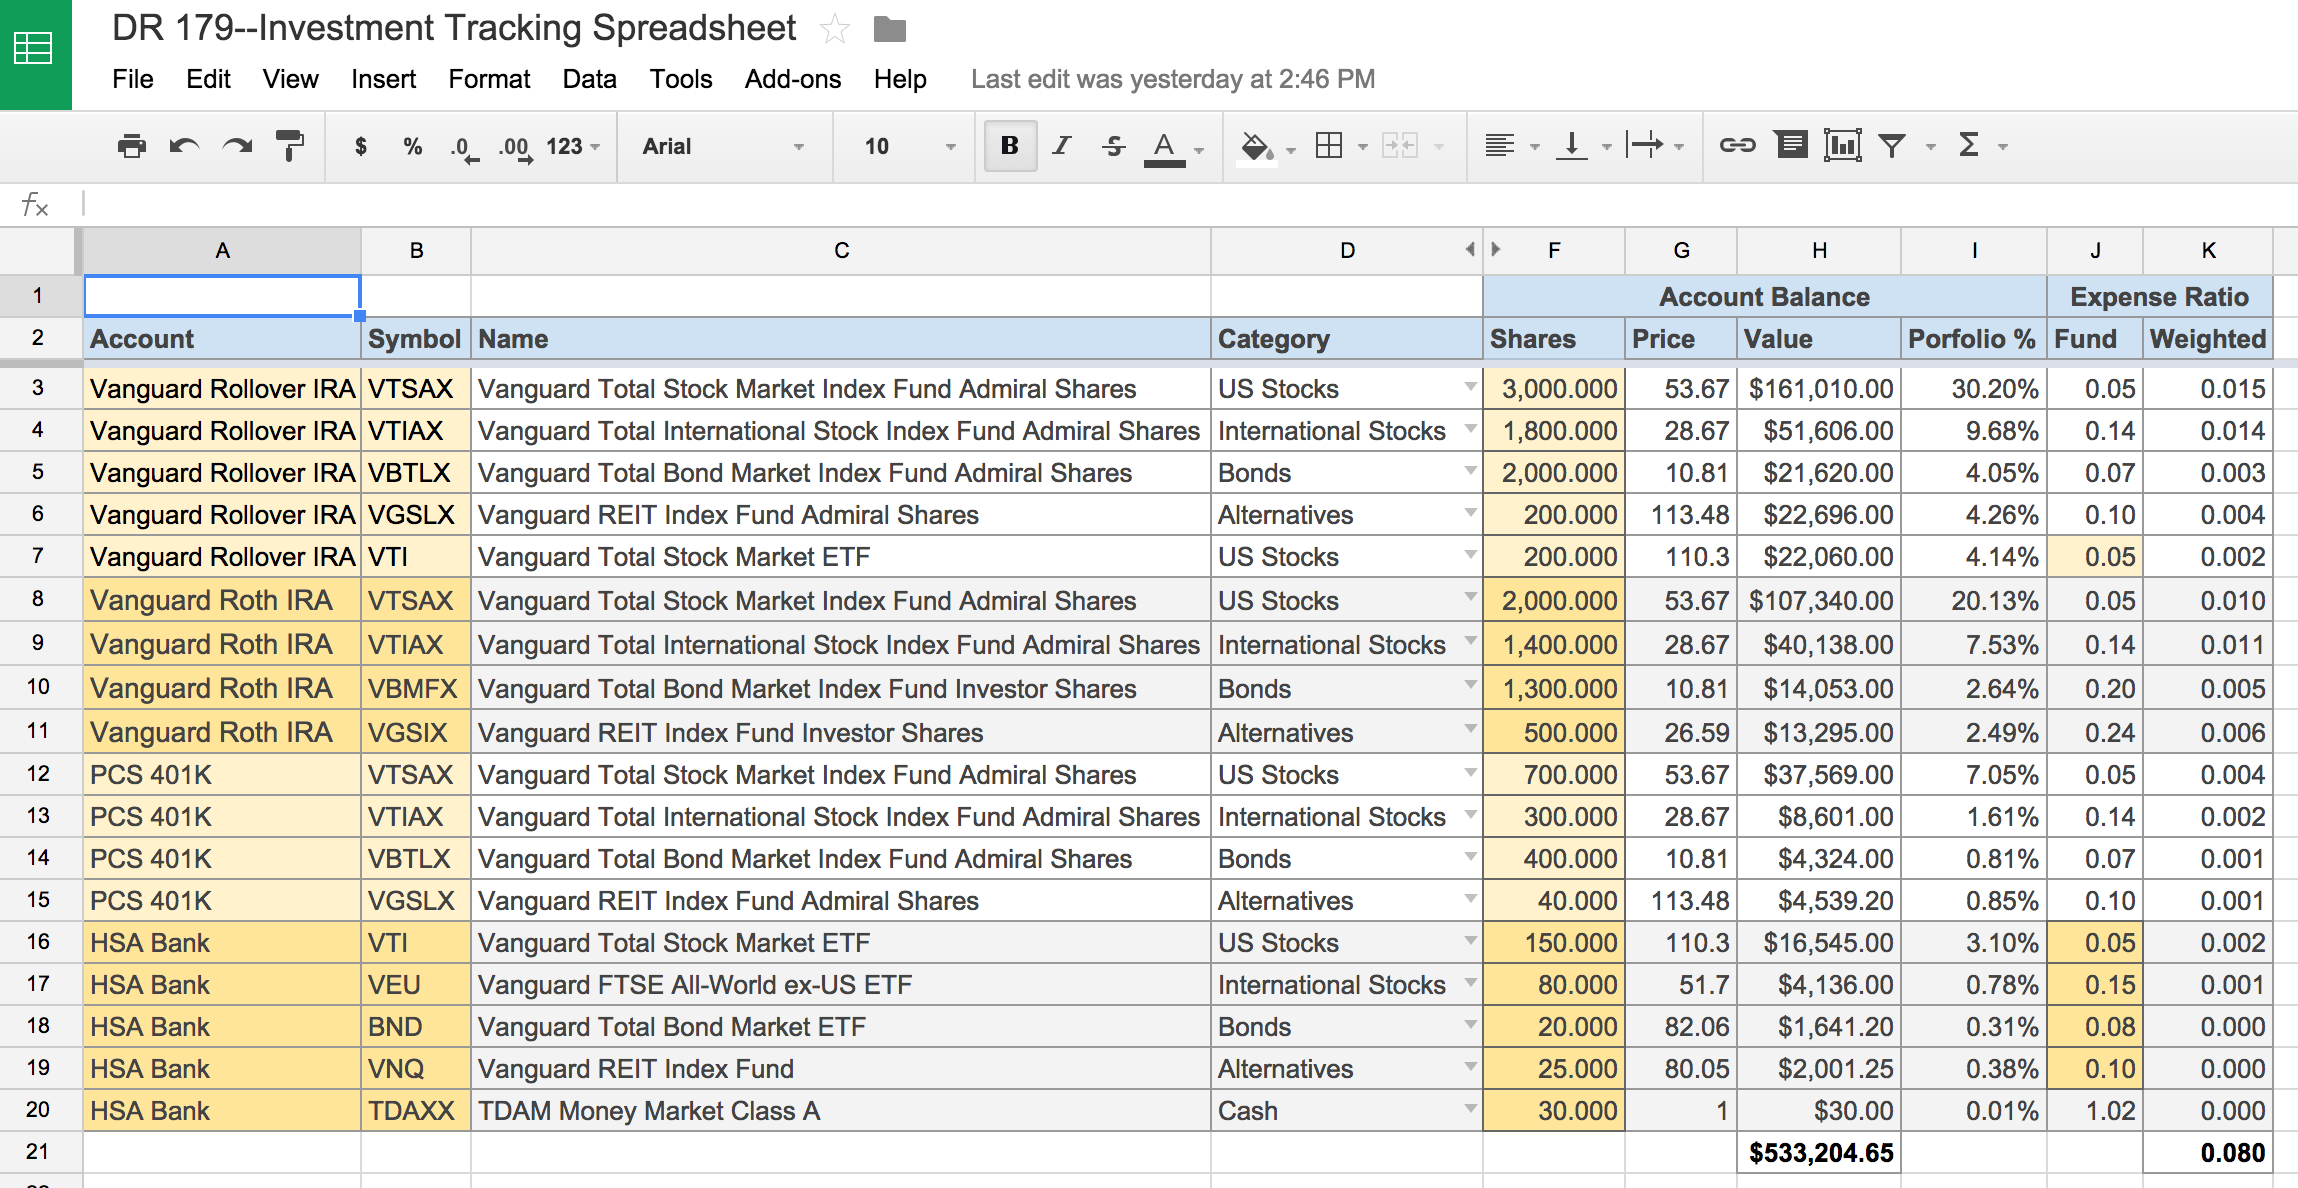 Energy Tracking Spreadsheet For An Awesome And Free Investment Tracking Spreadsheet